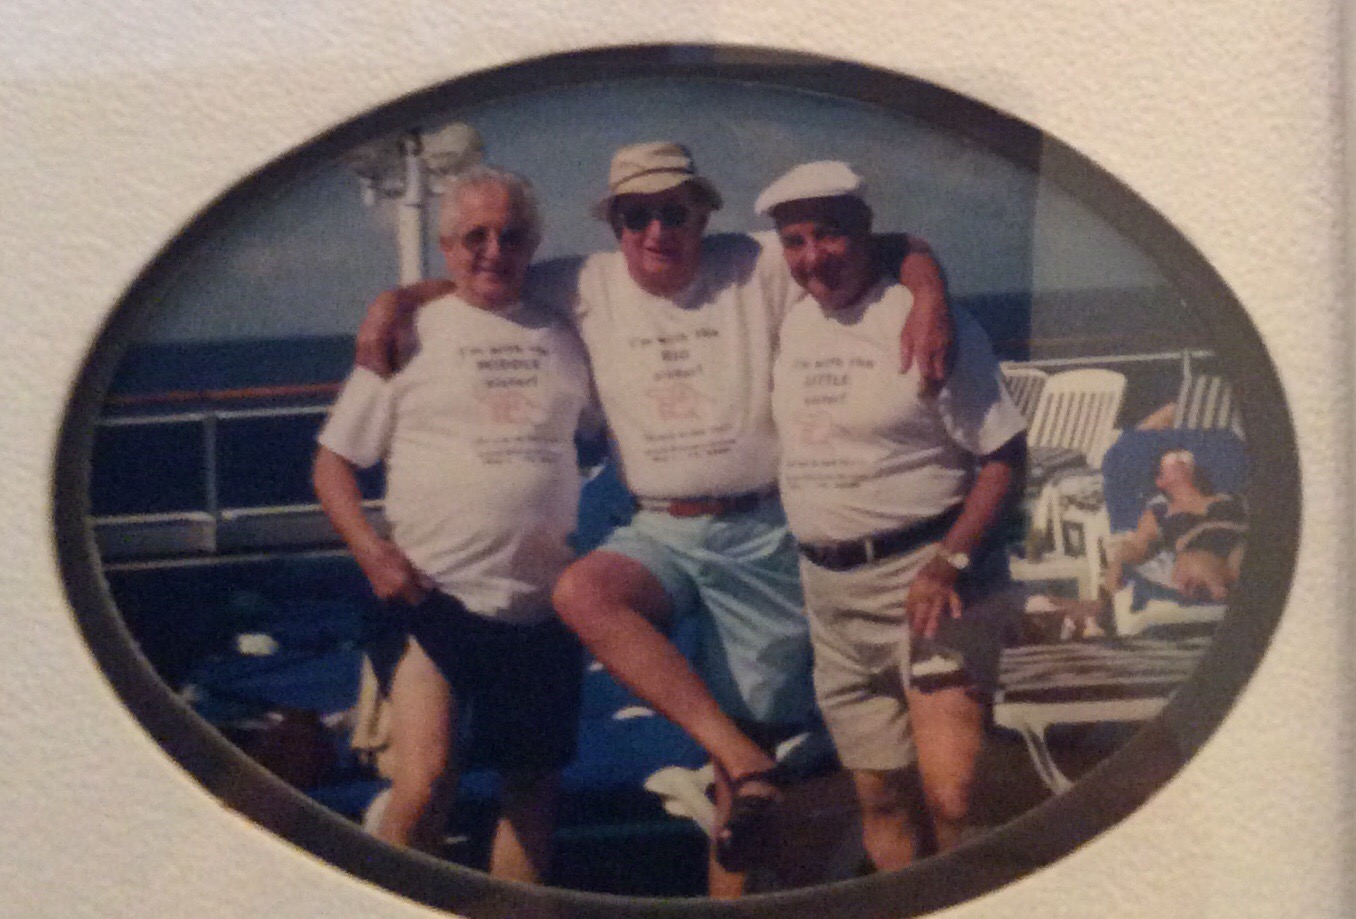 Mike, Tony and Harry on our cruise together